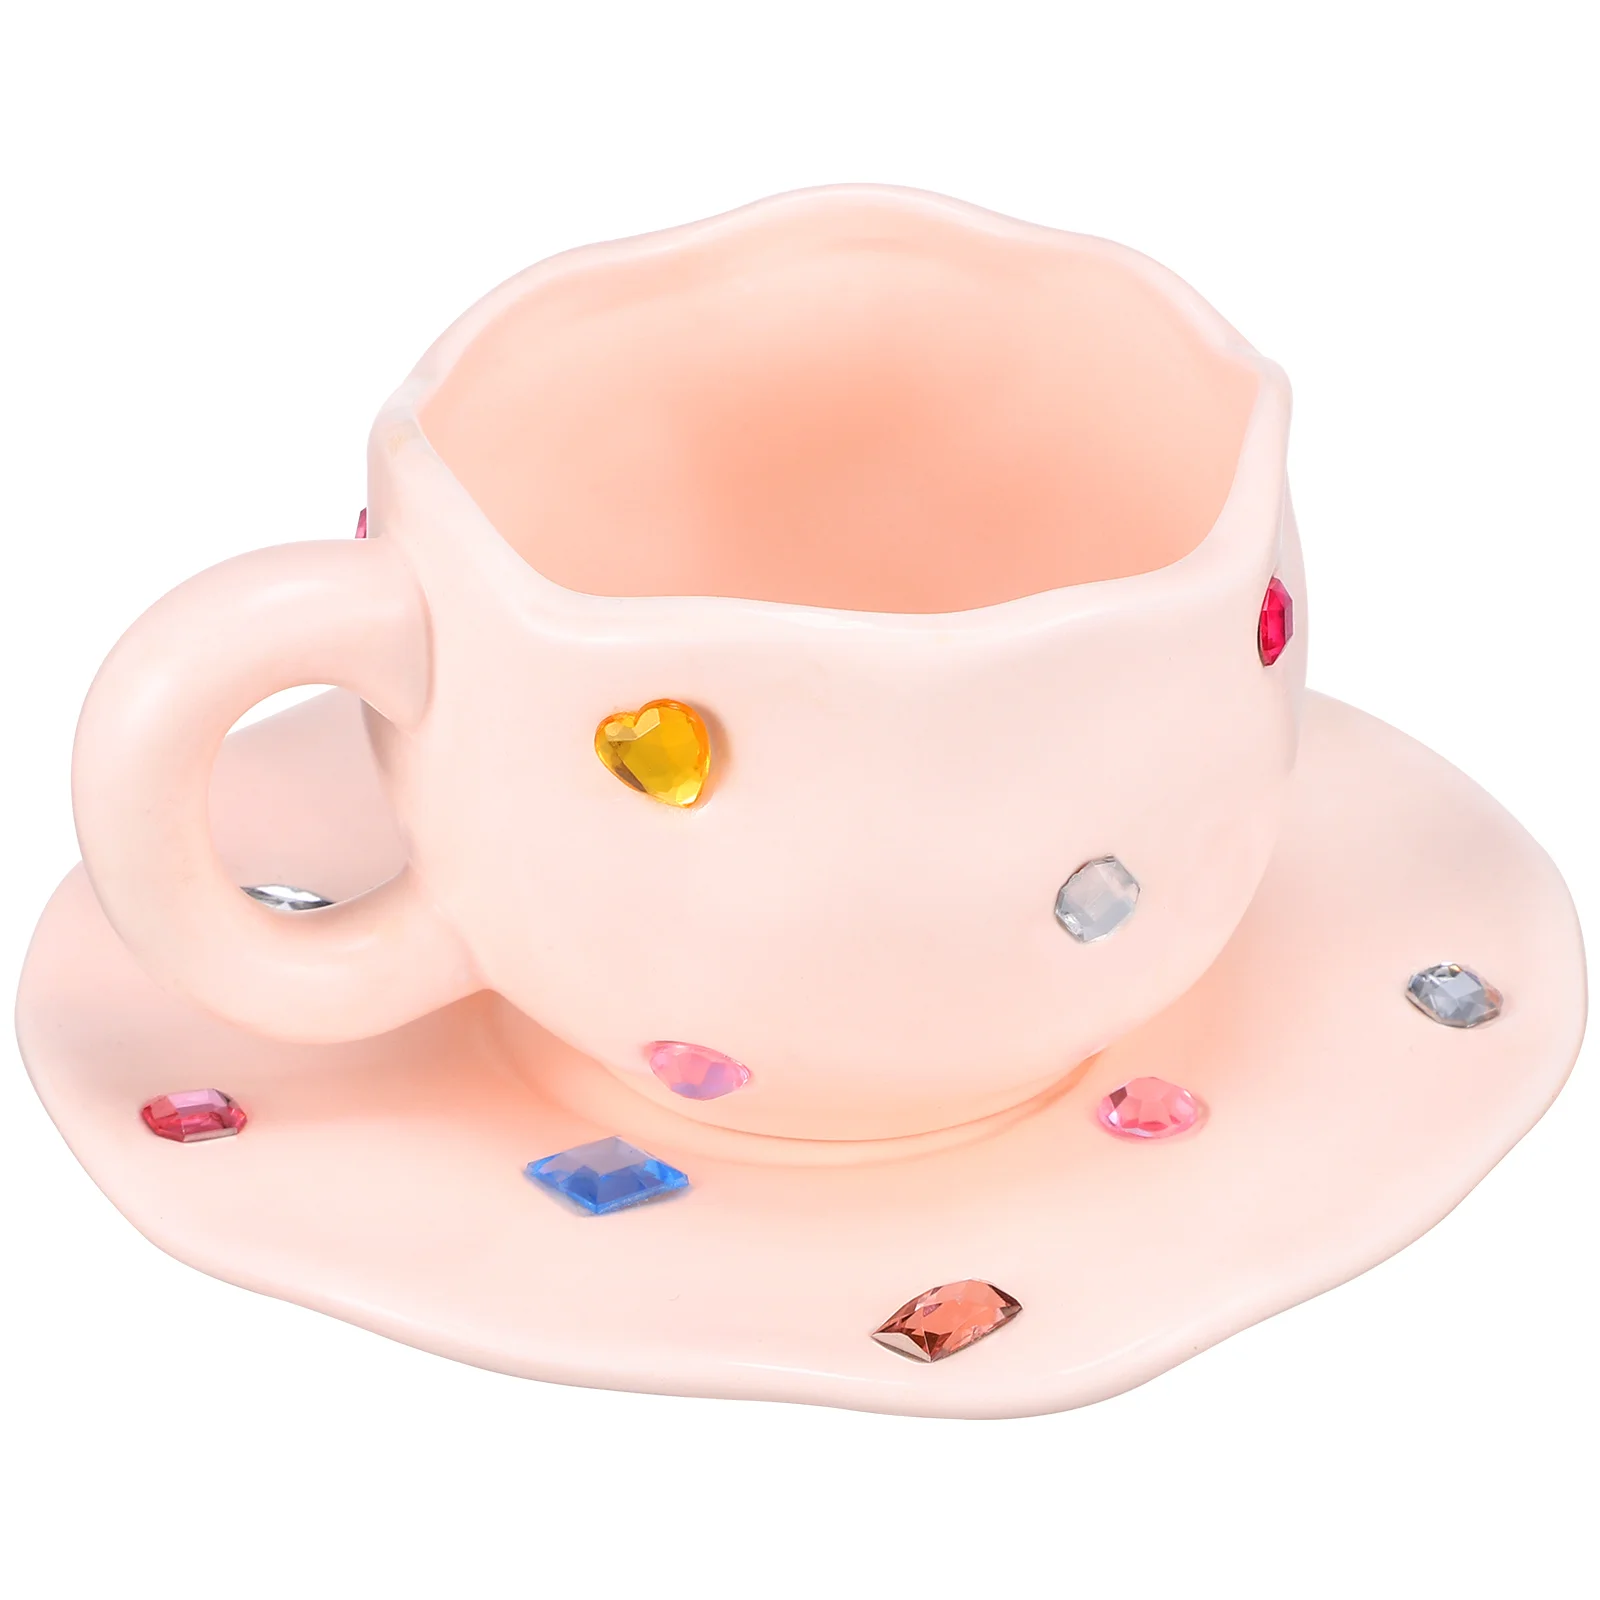 

Milk Cup With Saucer Mug Handle Coffee Cups Mugs Water Holiday Items Cappuccino Latte